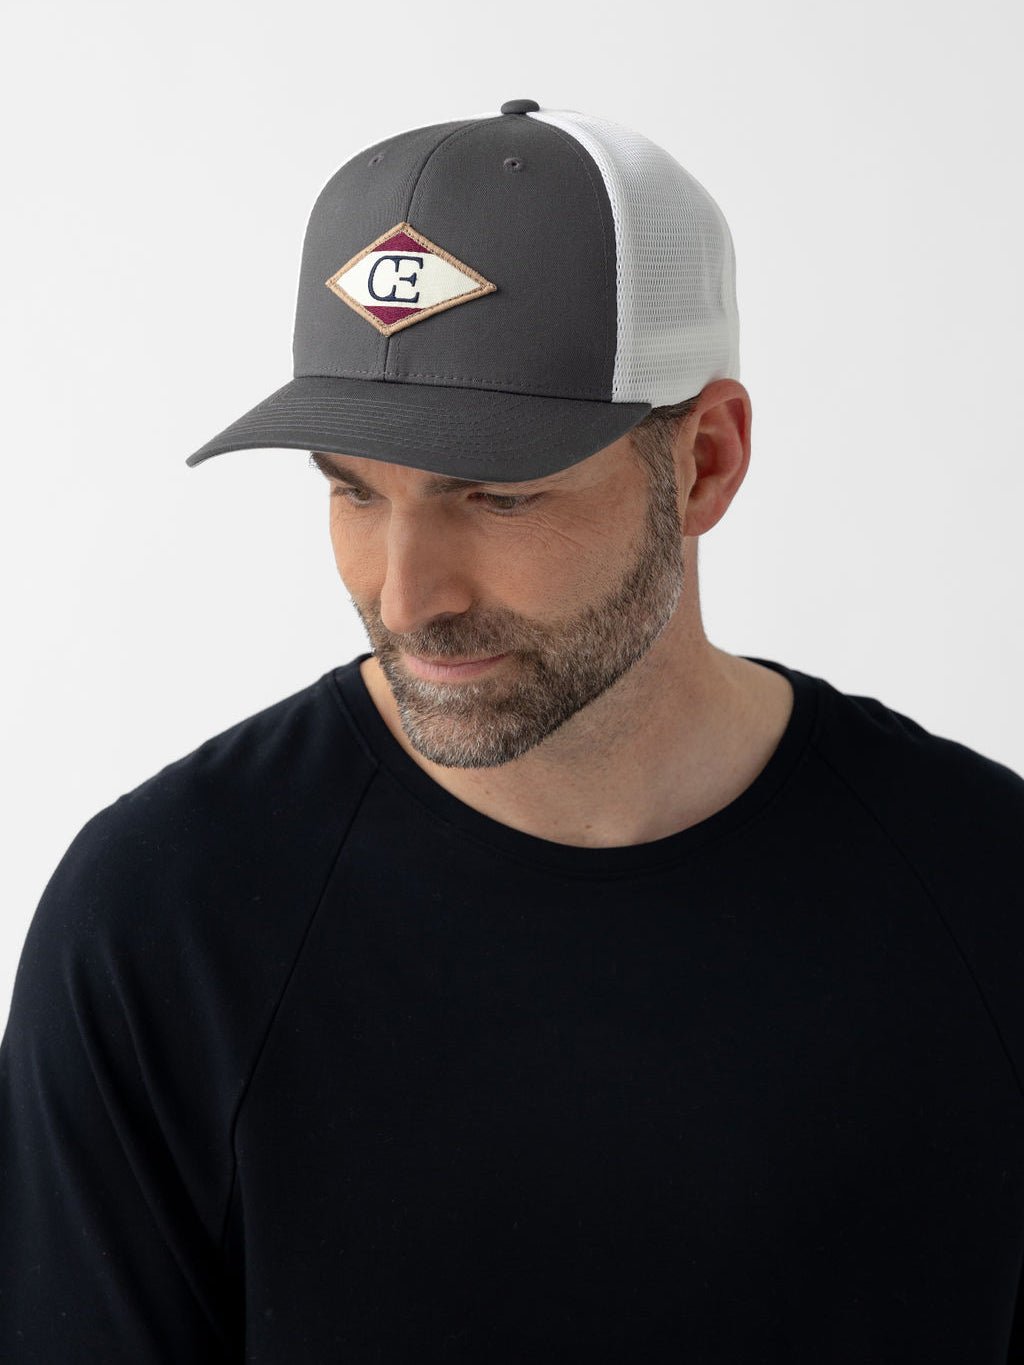 Man wearing charcoal/white diamond mesh trucker hat looking down |Color:Charcoal/White